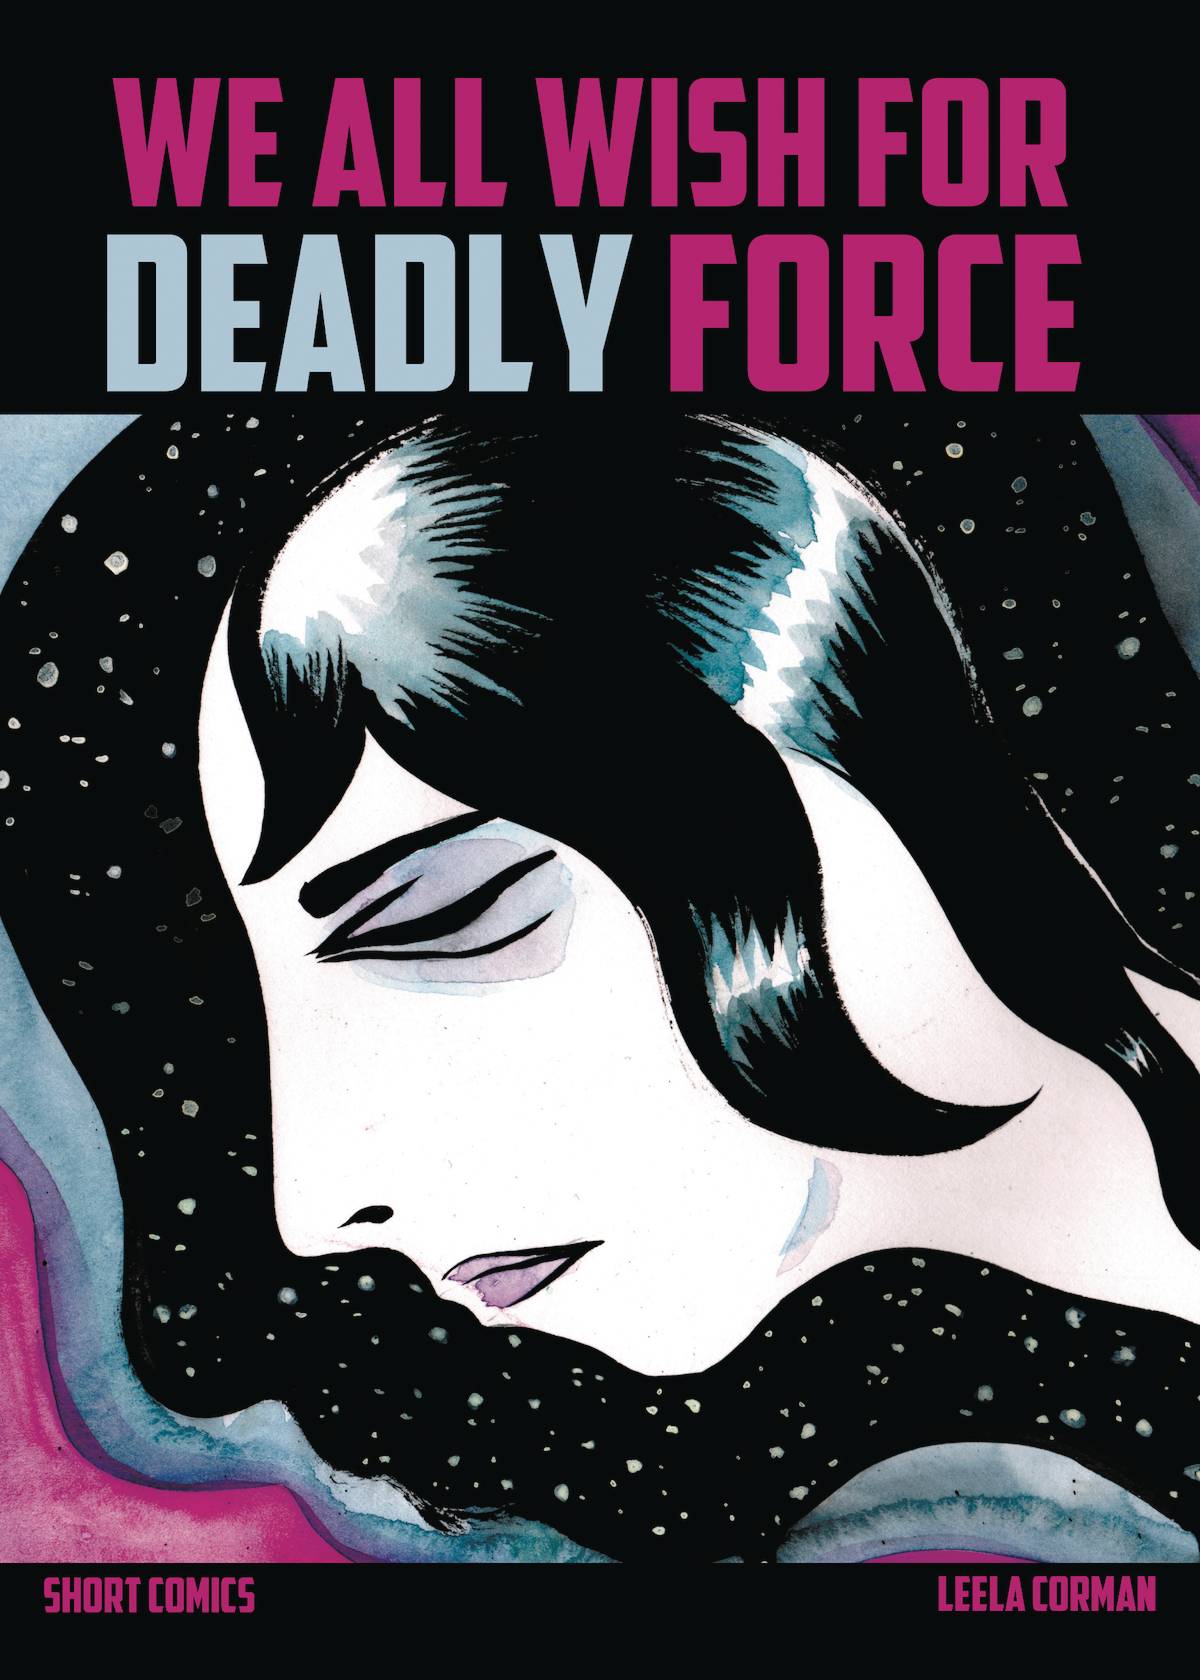 We All Wish For Deadly Force Graphic Novel